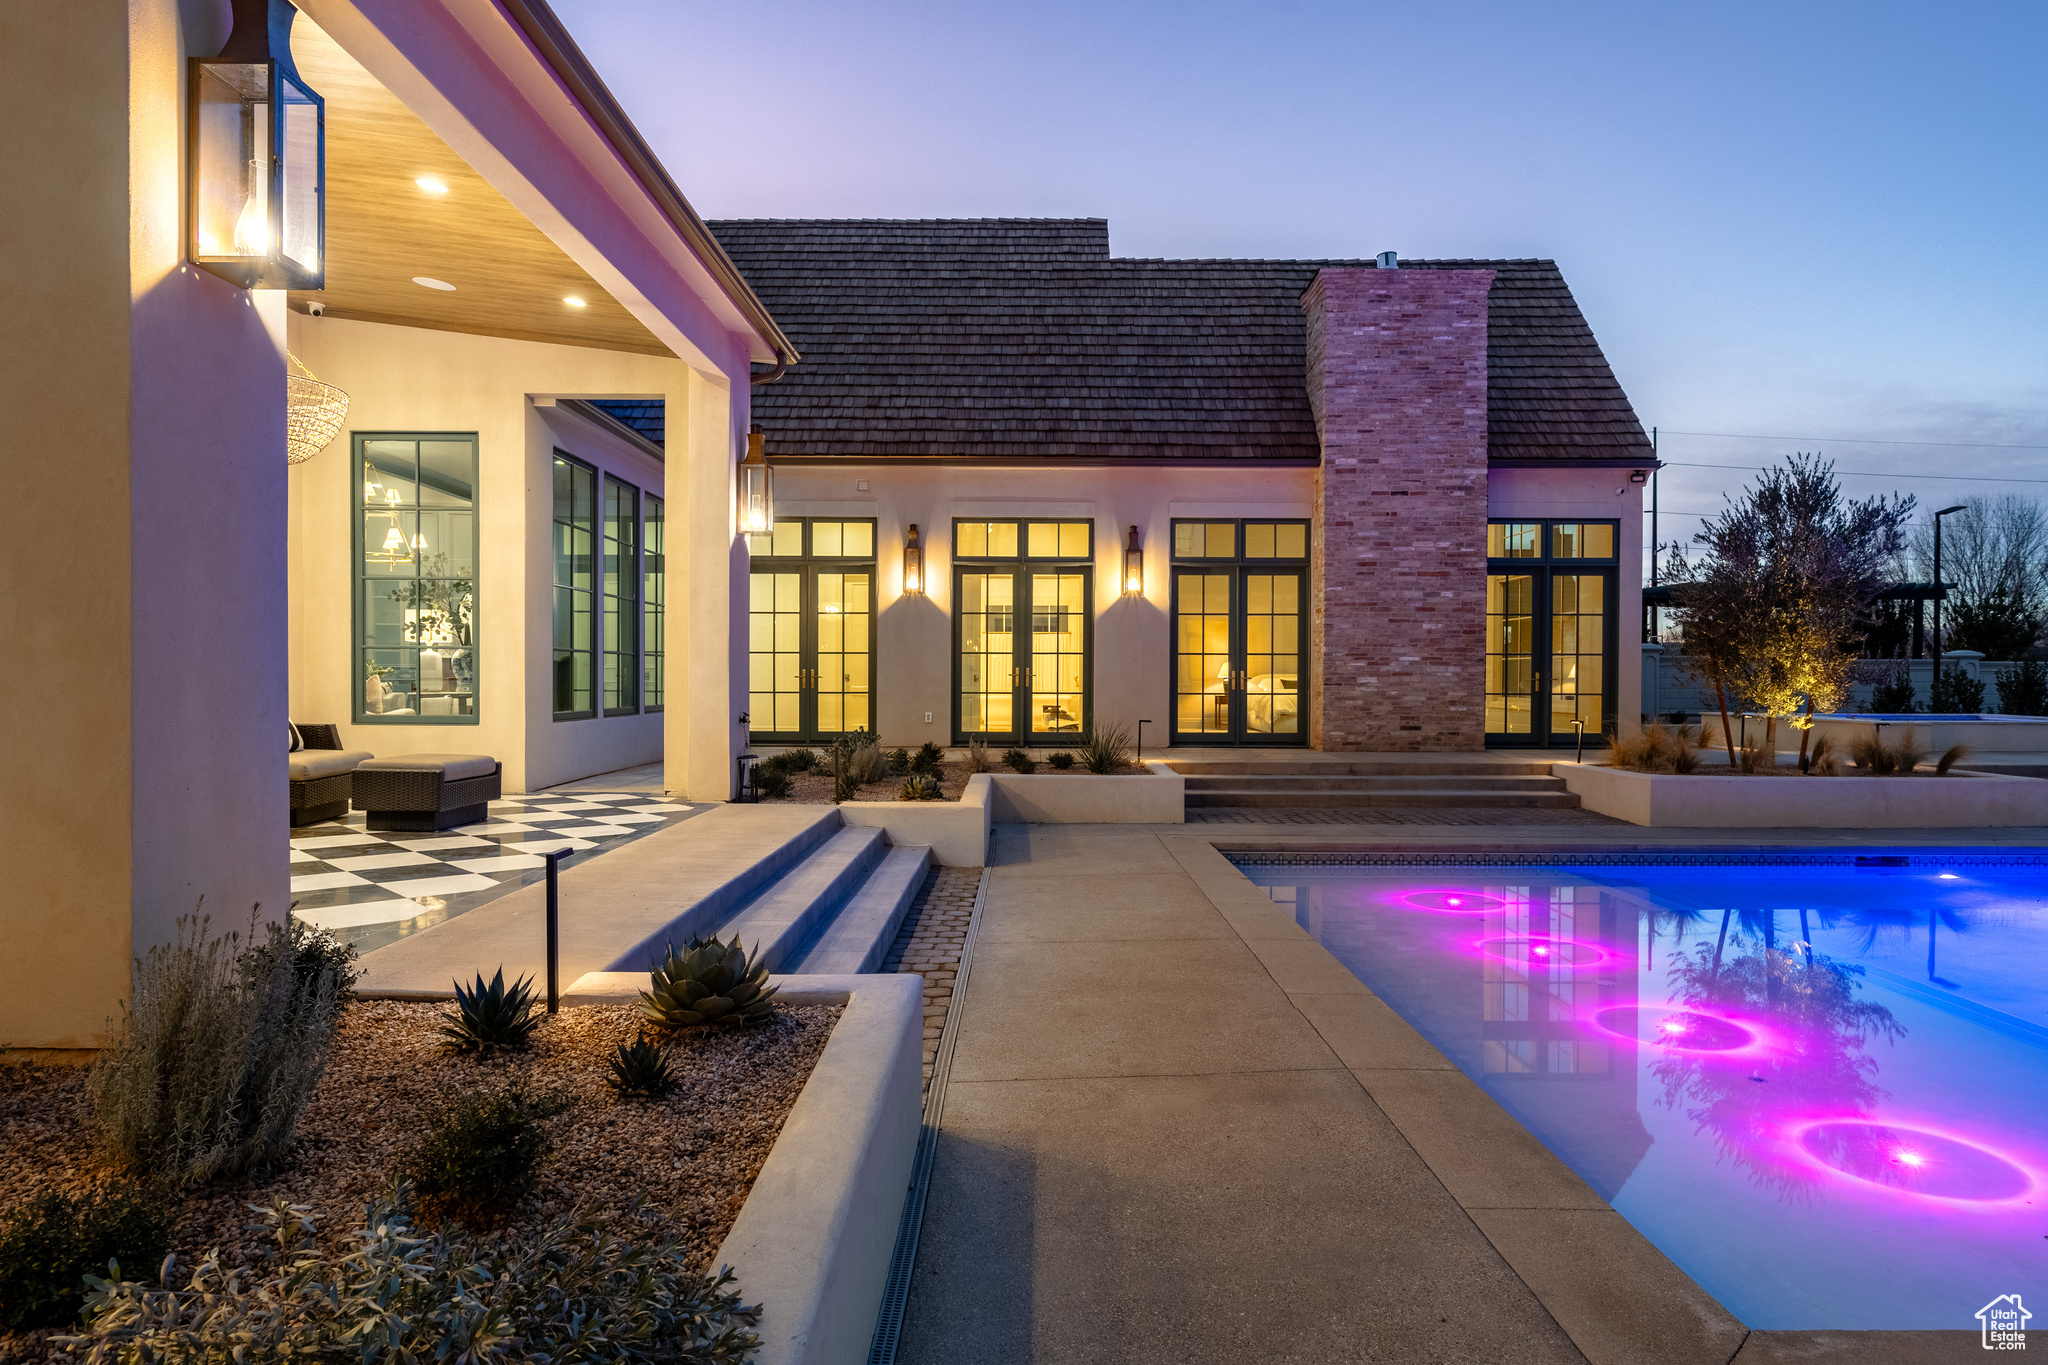 Pool at dusk with a patio and french doors